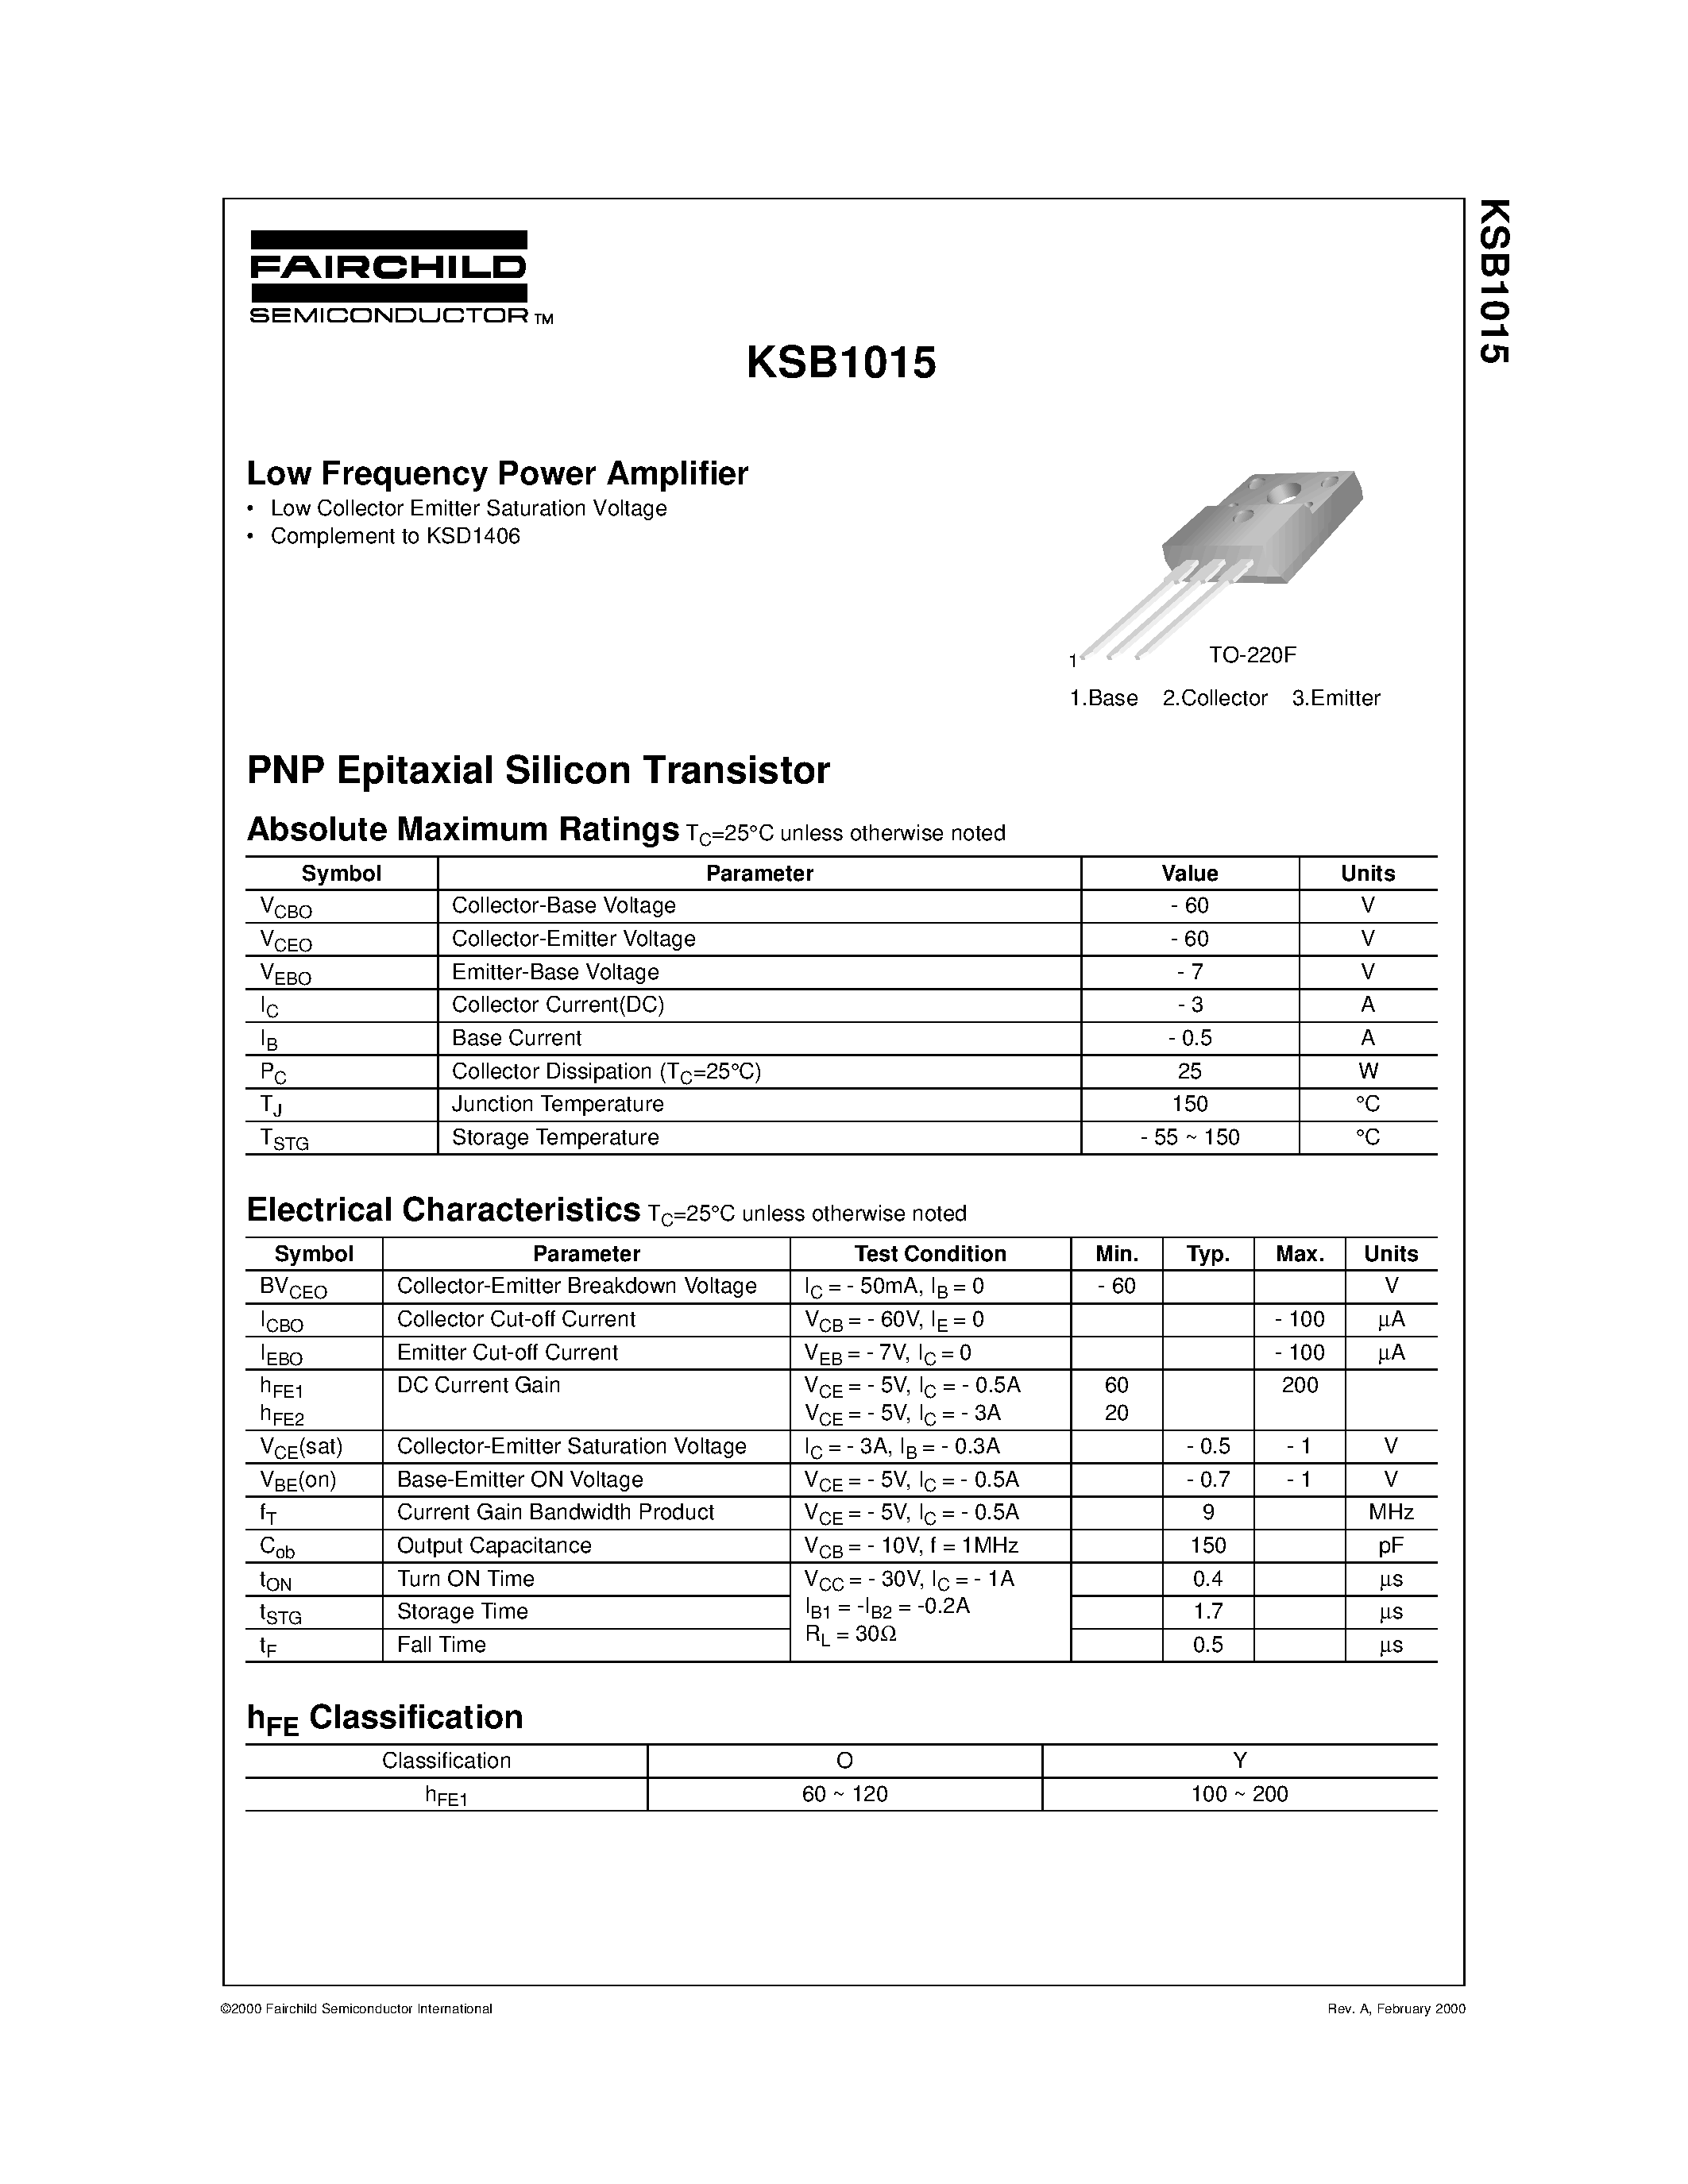 Datasheet KSB1015 - Low Frequency Power Amplifier page 1